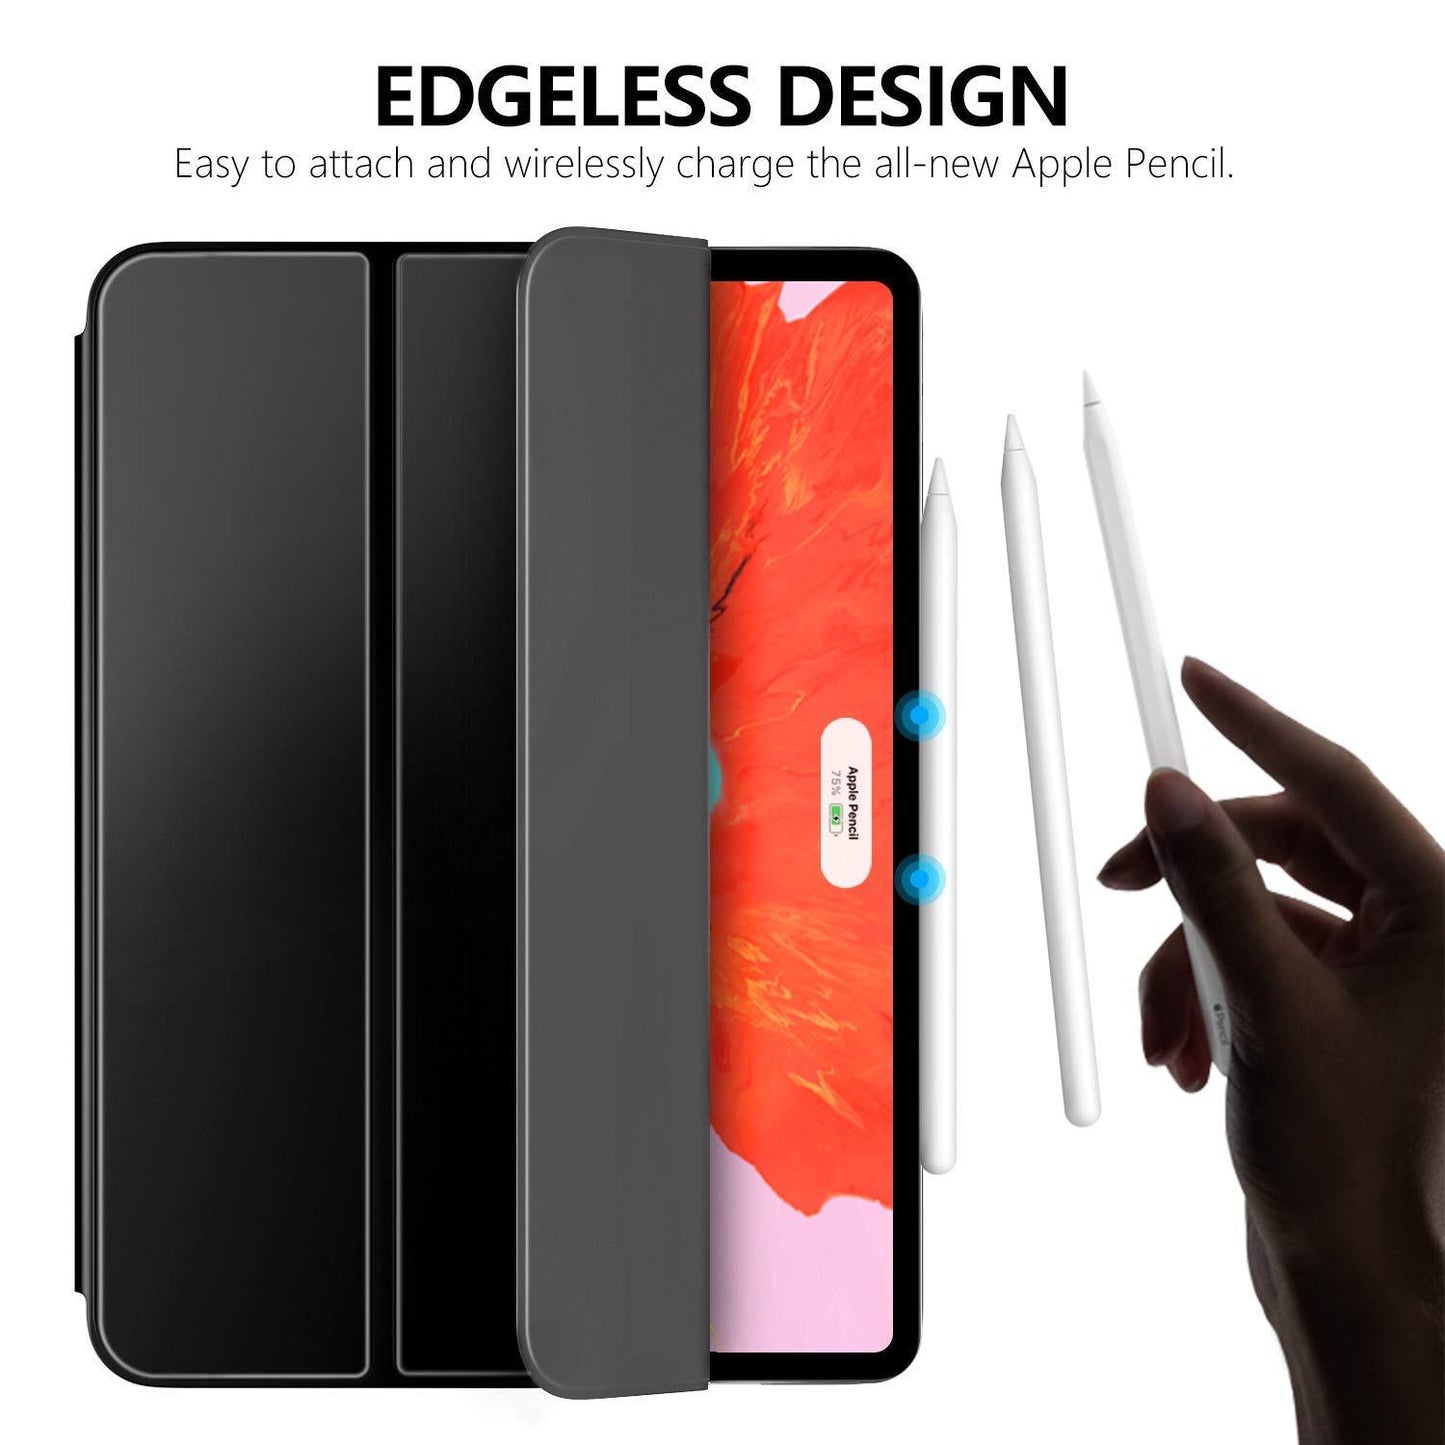 Magnetic Tri-fold Smart Cover for iPad Pro 12.9-inch, 3rd Gen (2018)